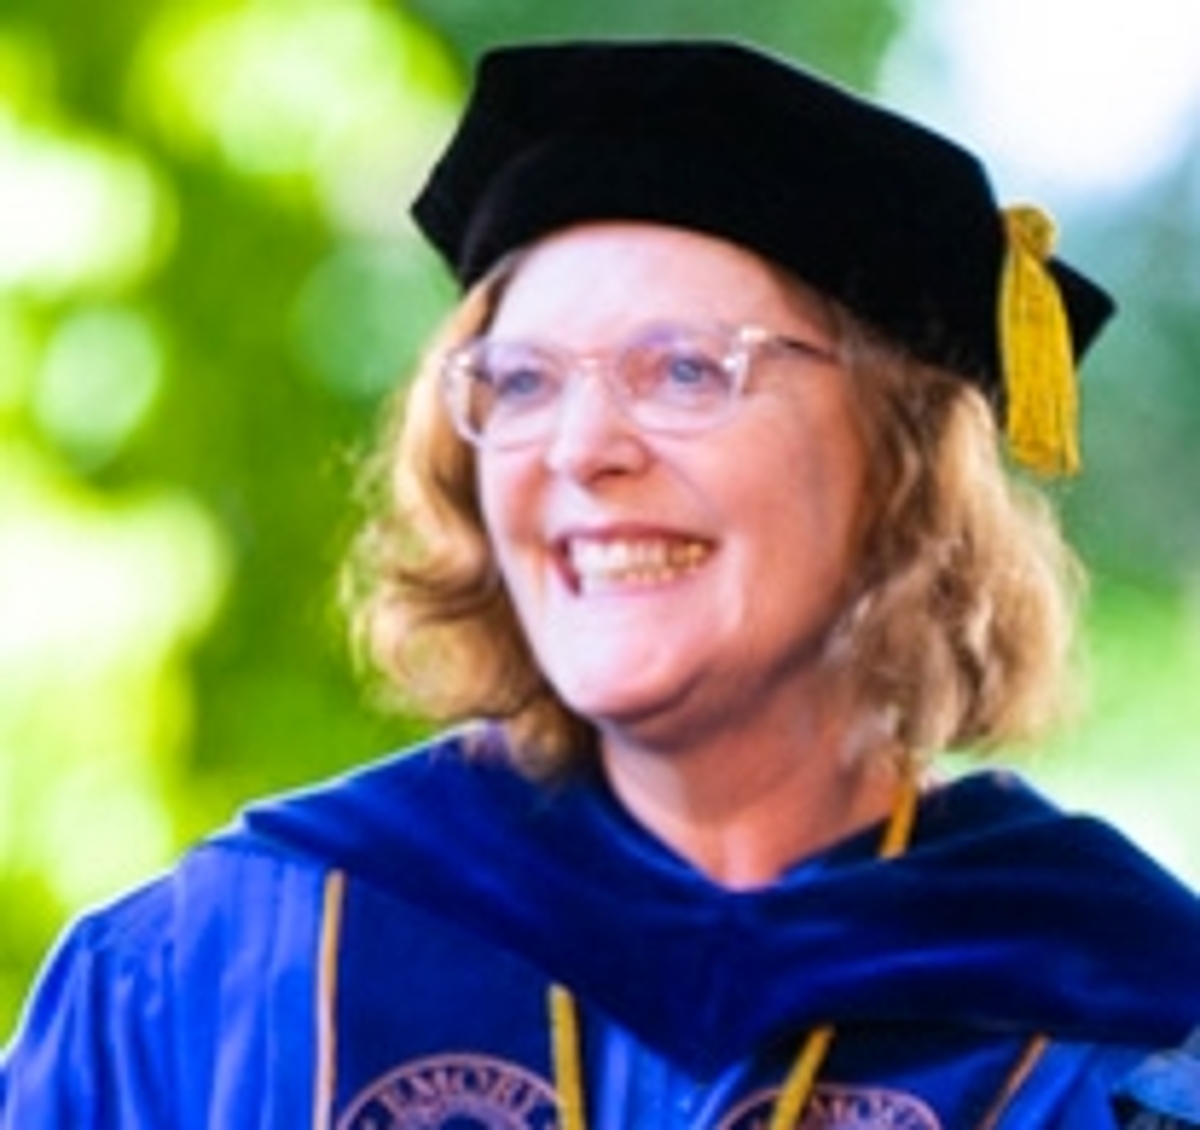 A candid portrait of Emory President Claire E. Sterk in commencement attire.